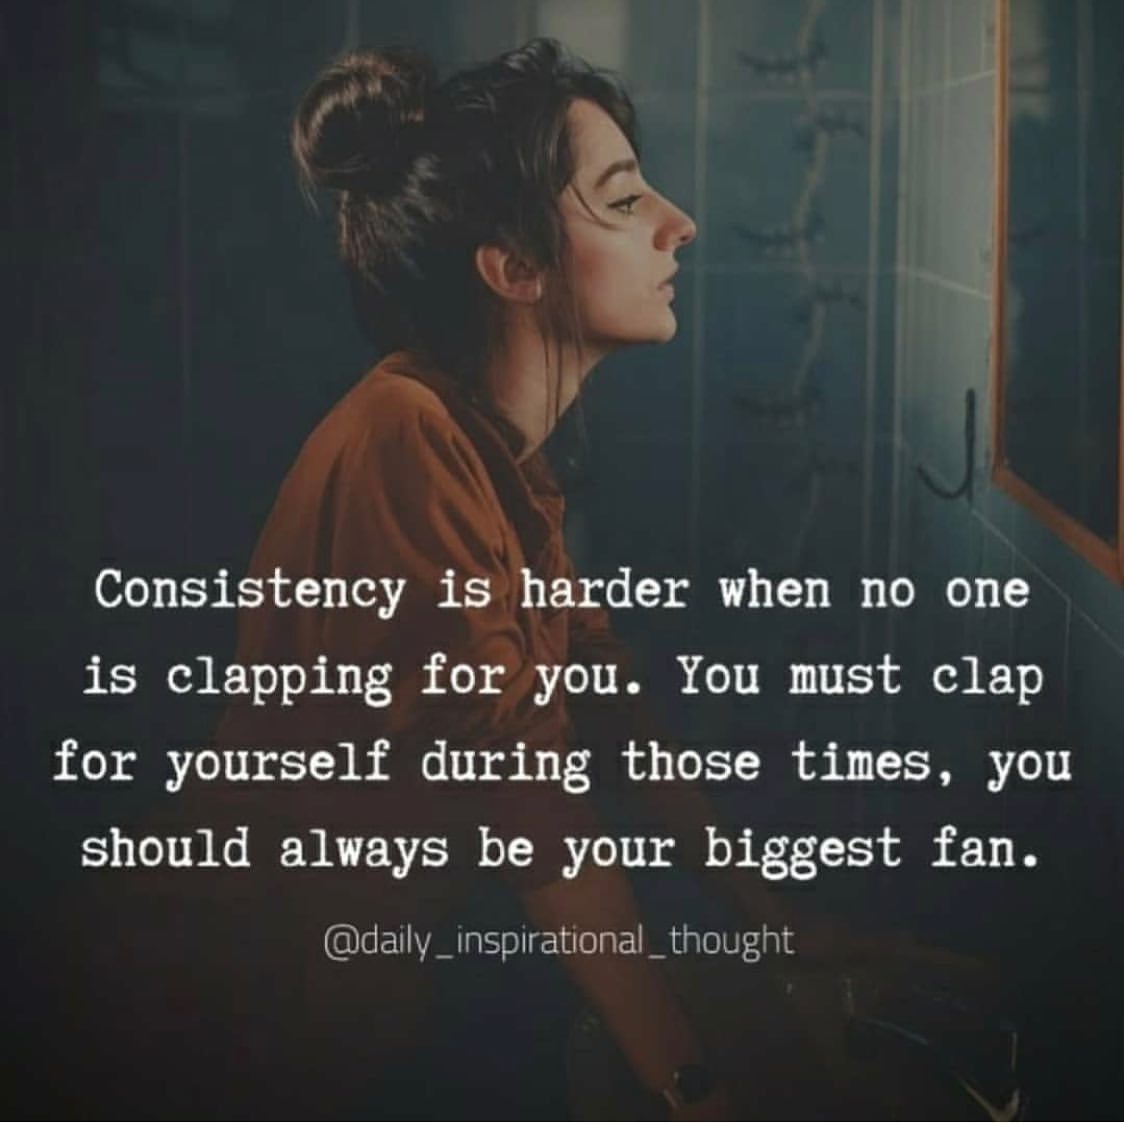 Consistency is harder when no one is clapping for you. You must clap for yourself during those times, you should always be your biggest fan.